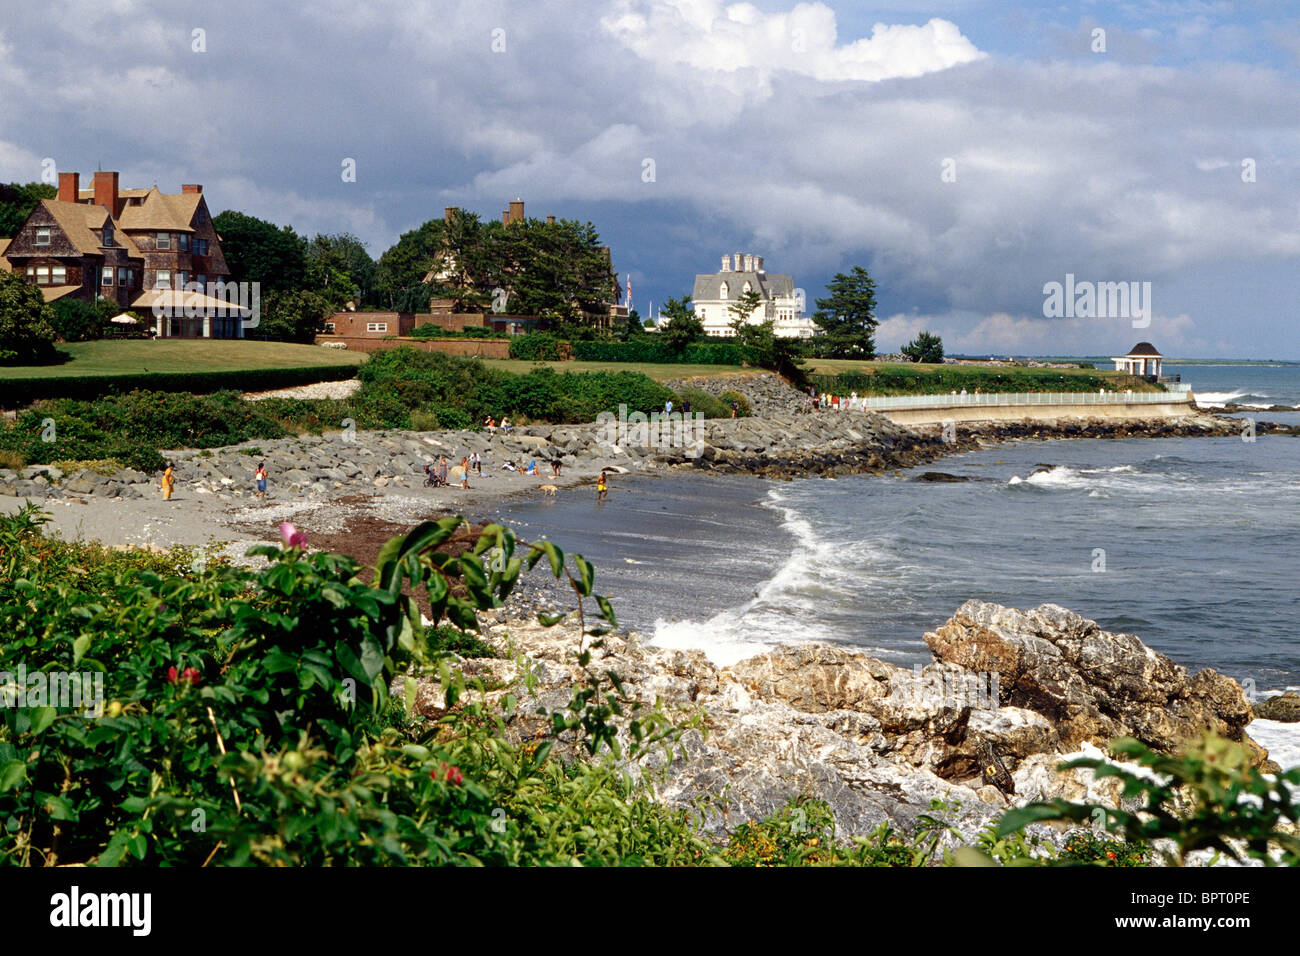 View of the Cliff Walk Trail with Coastal Mansions and Beach, Newport, Rhode Island Stock Photo